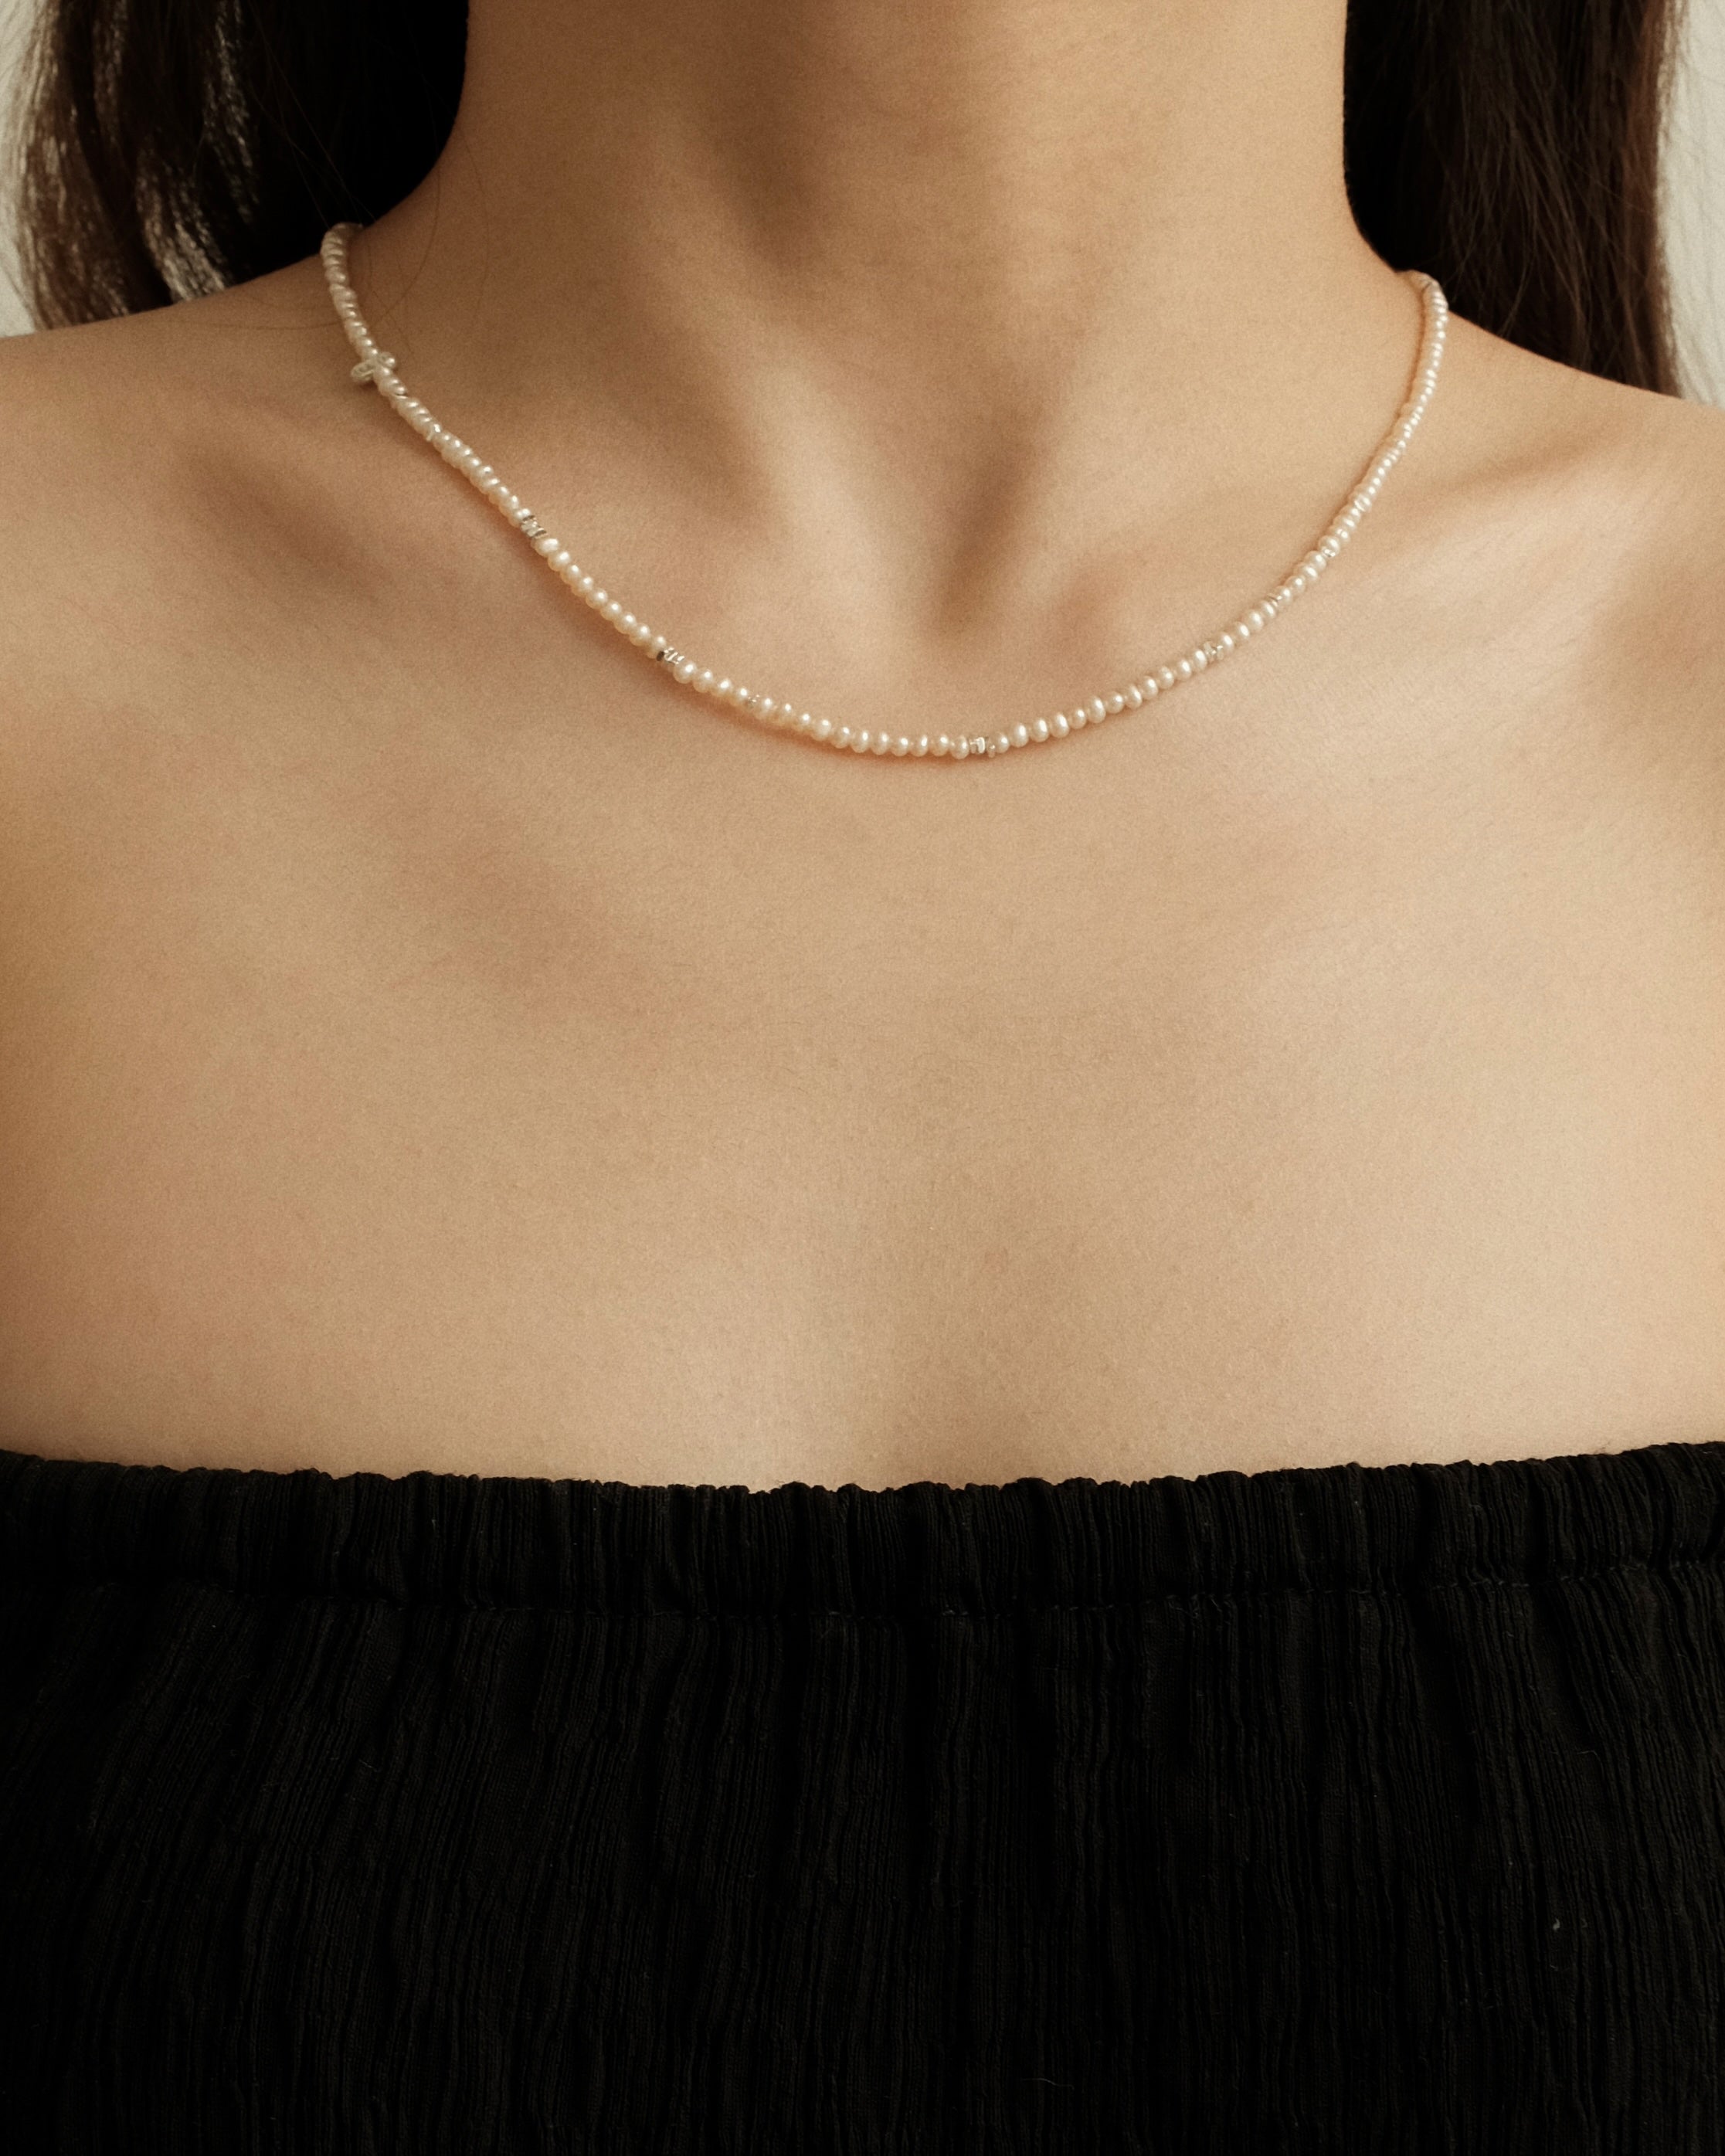 The Nocturne Choker